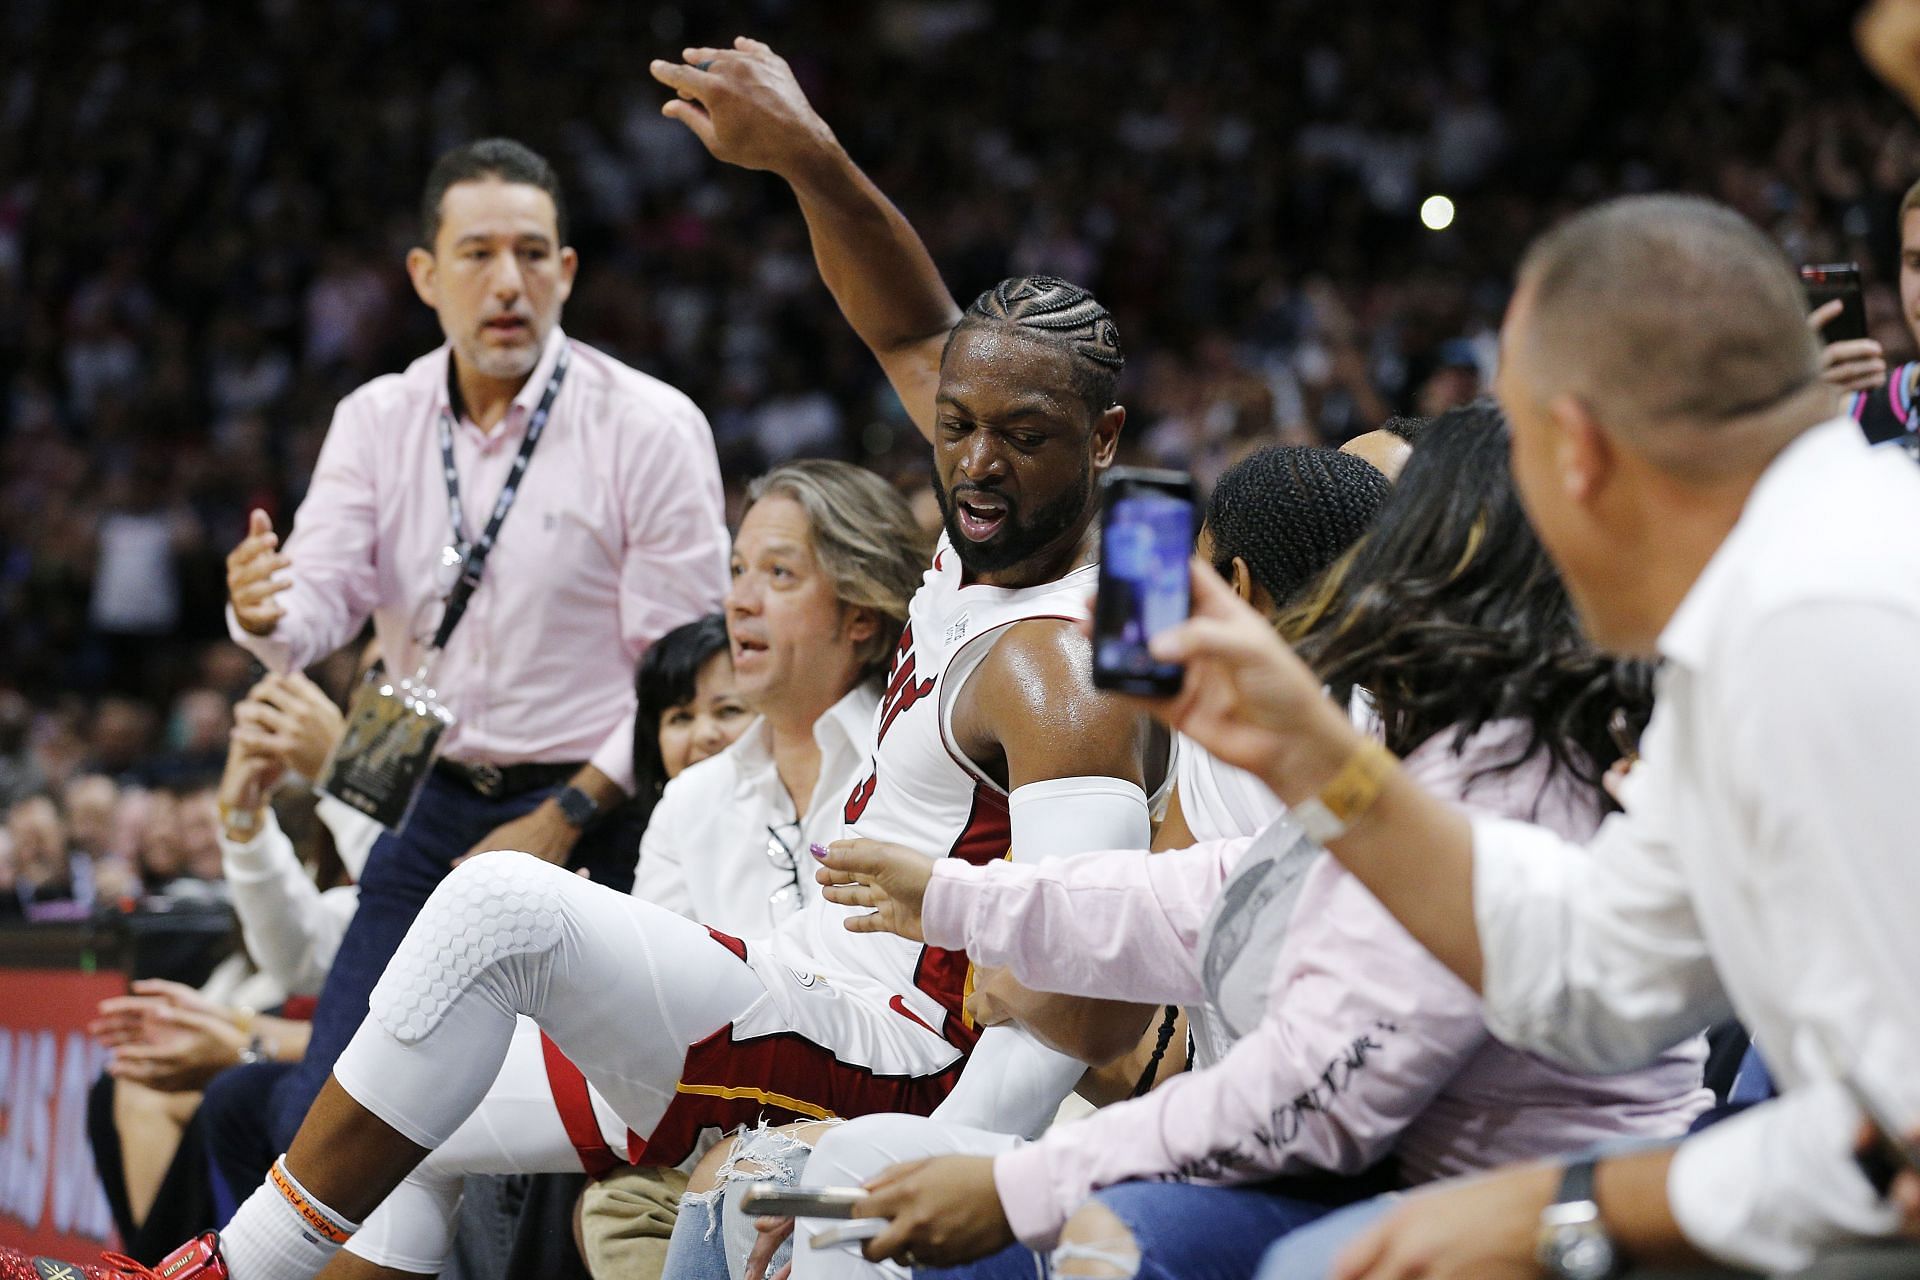 Dwyane Wade #3 of the Miami Heat falls into the fans after shooting a three pointer against the Philadelphia 76ers during the second half at American Airlines Arena on April 09, 2019 in Miami, Florida